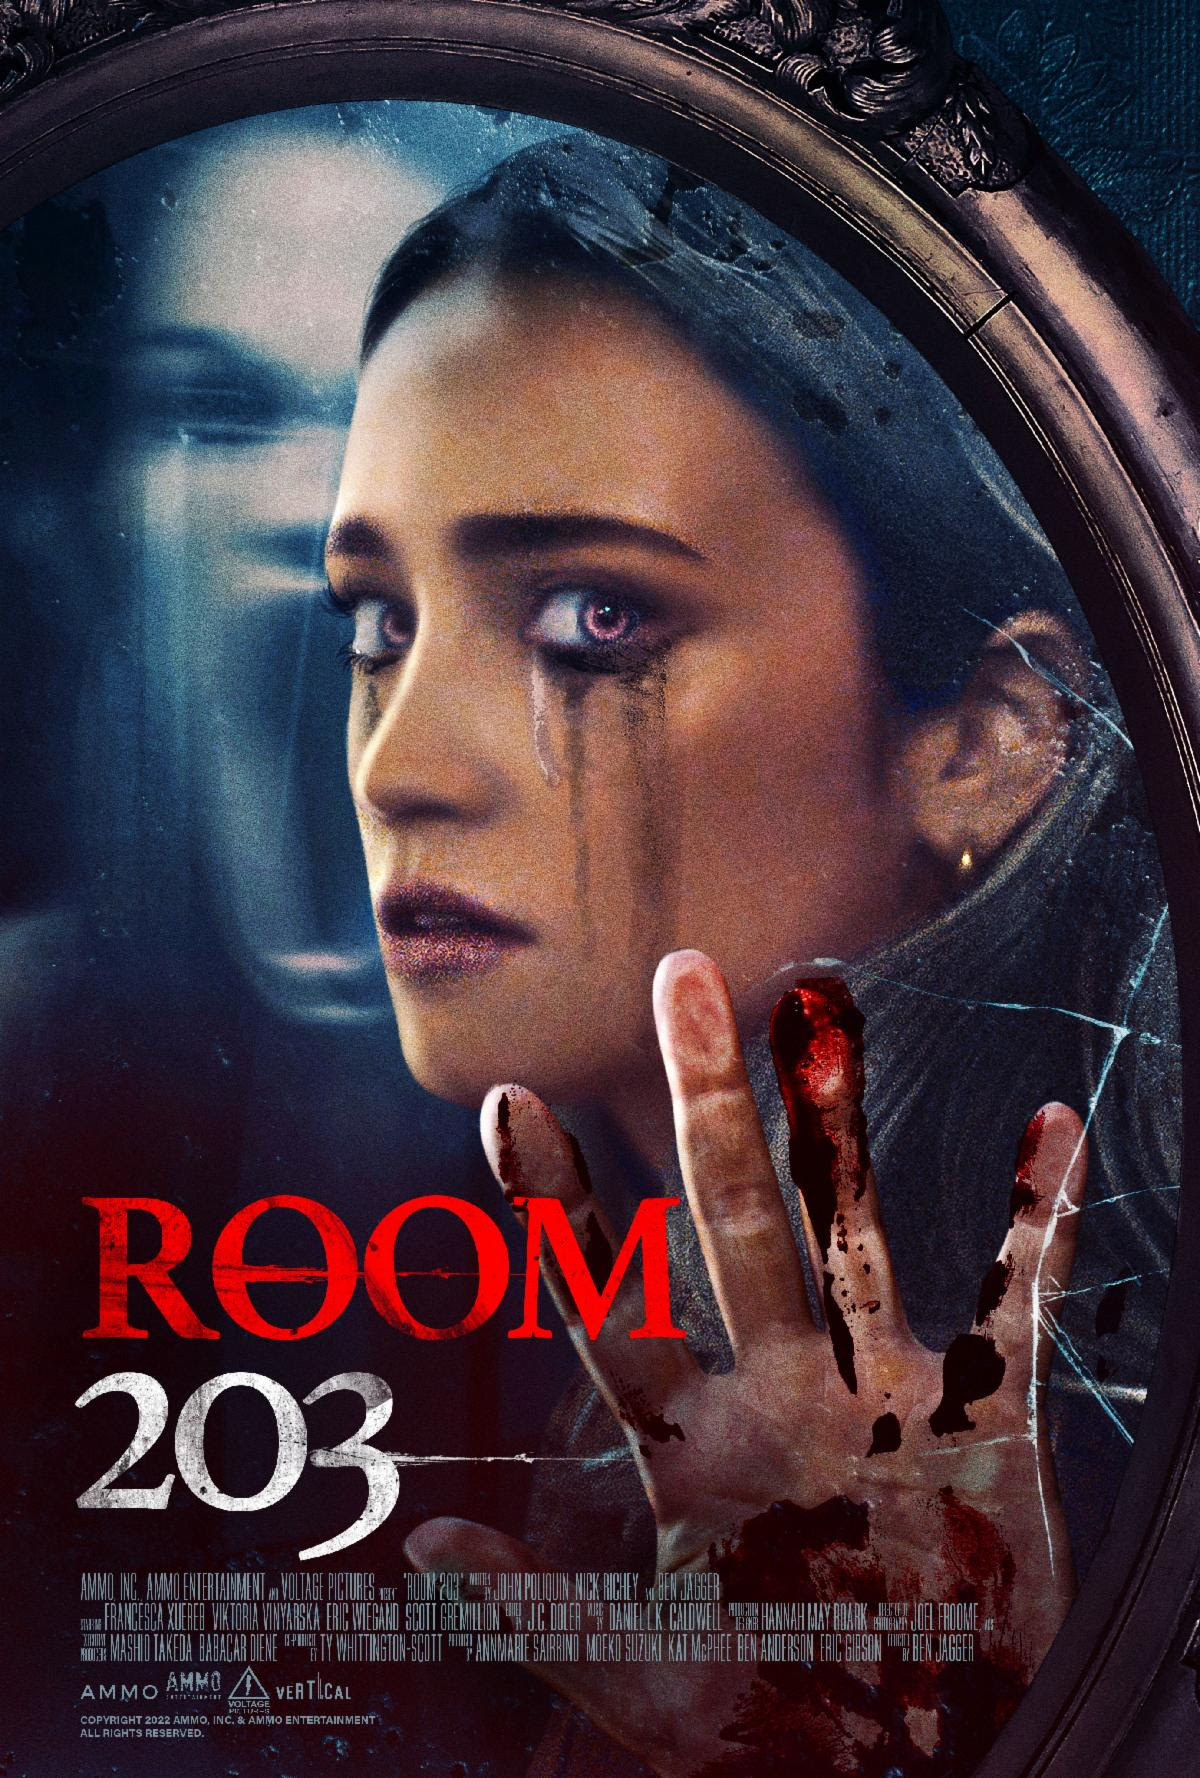 Room 203 - Movie Review